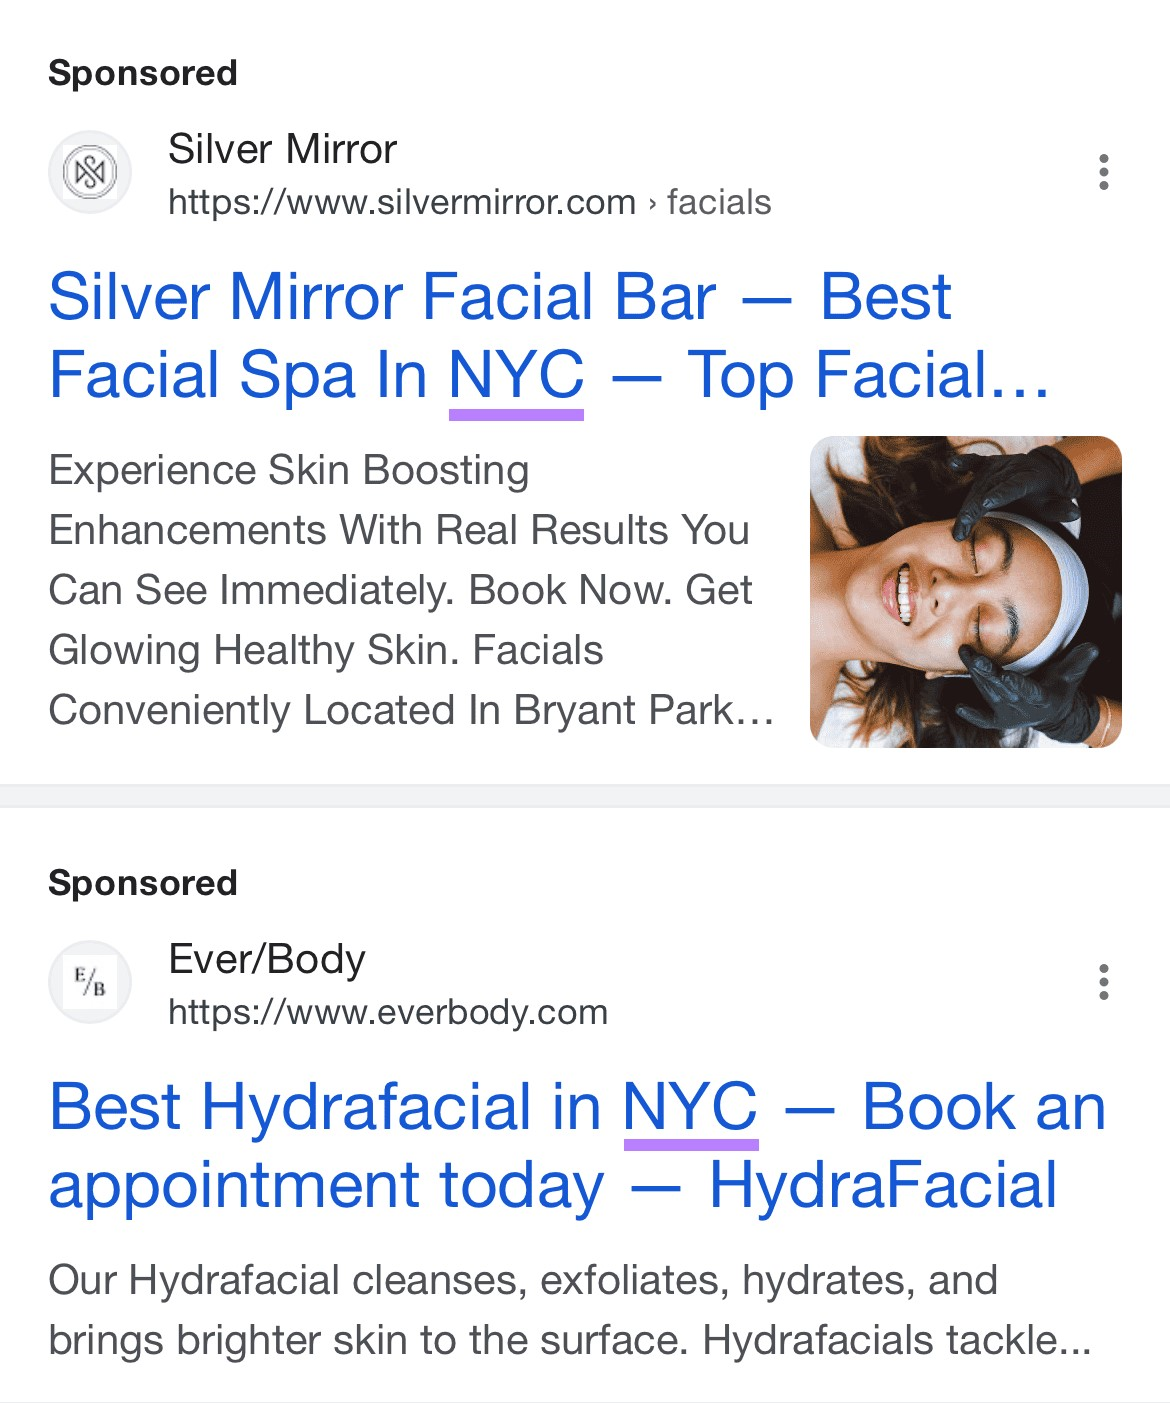 Google search ads for aestheticians in New York City